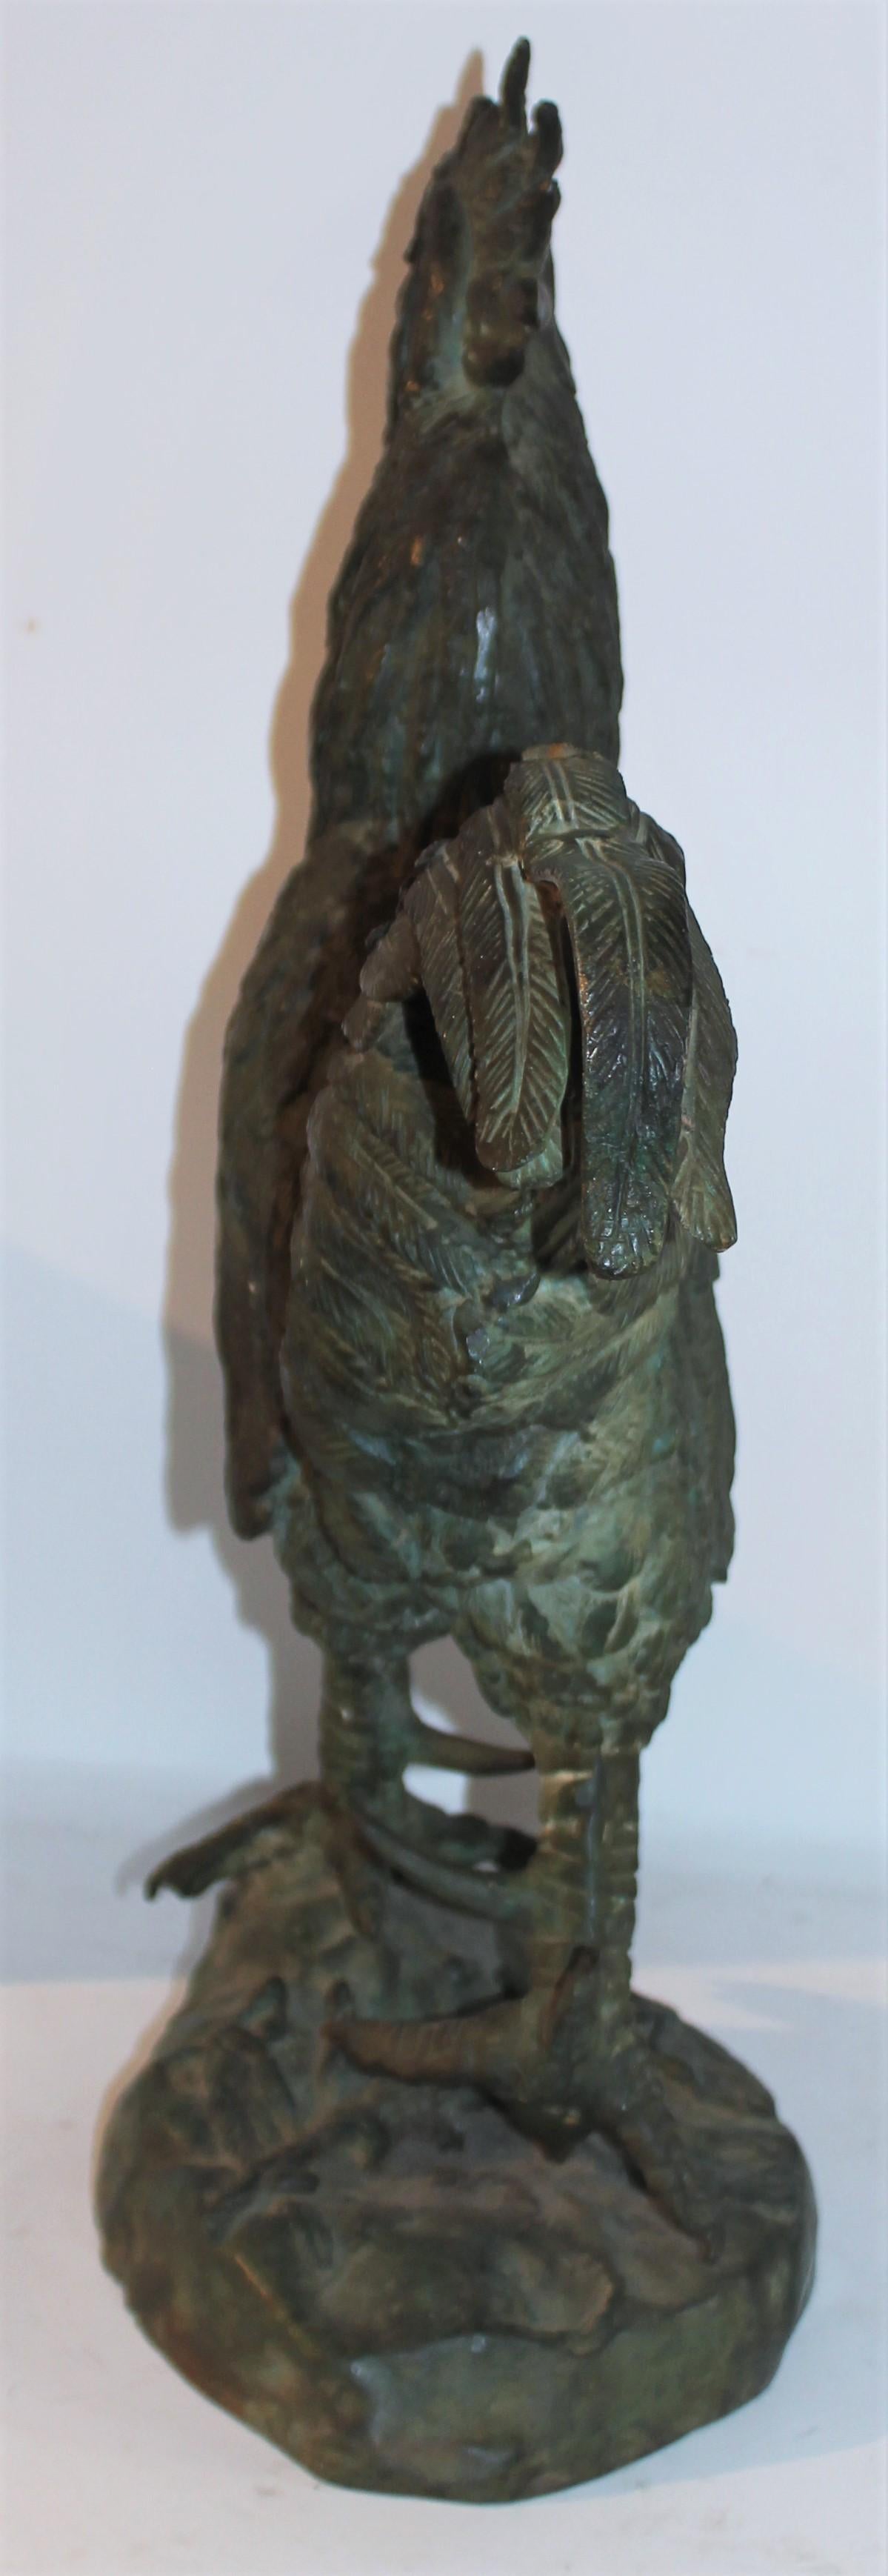 Adirondack Early 20thc Bronze Rooster Sculpture For Sale